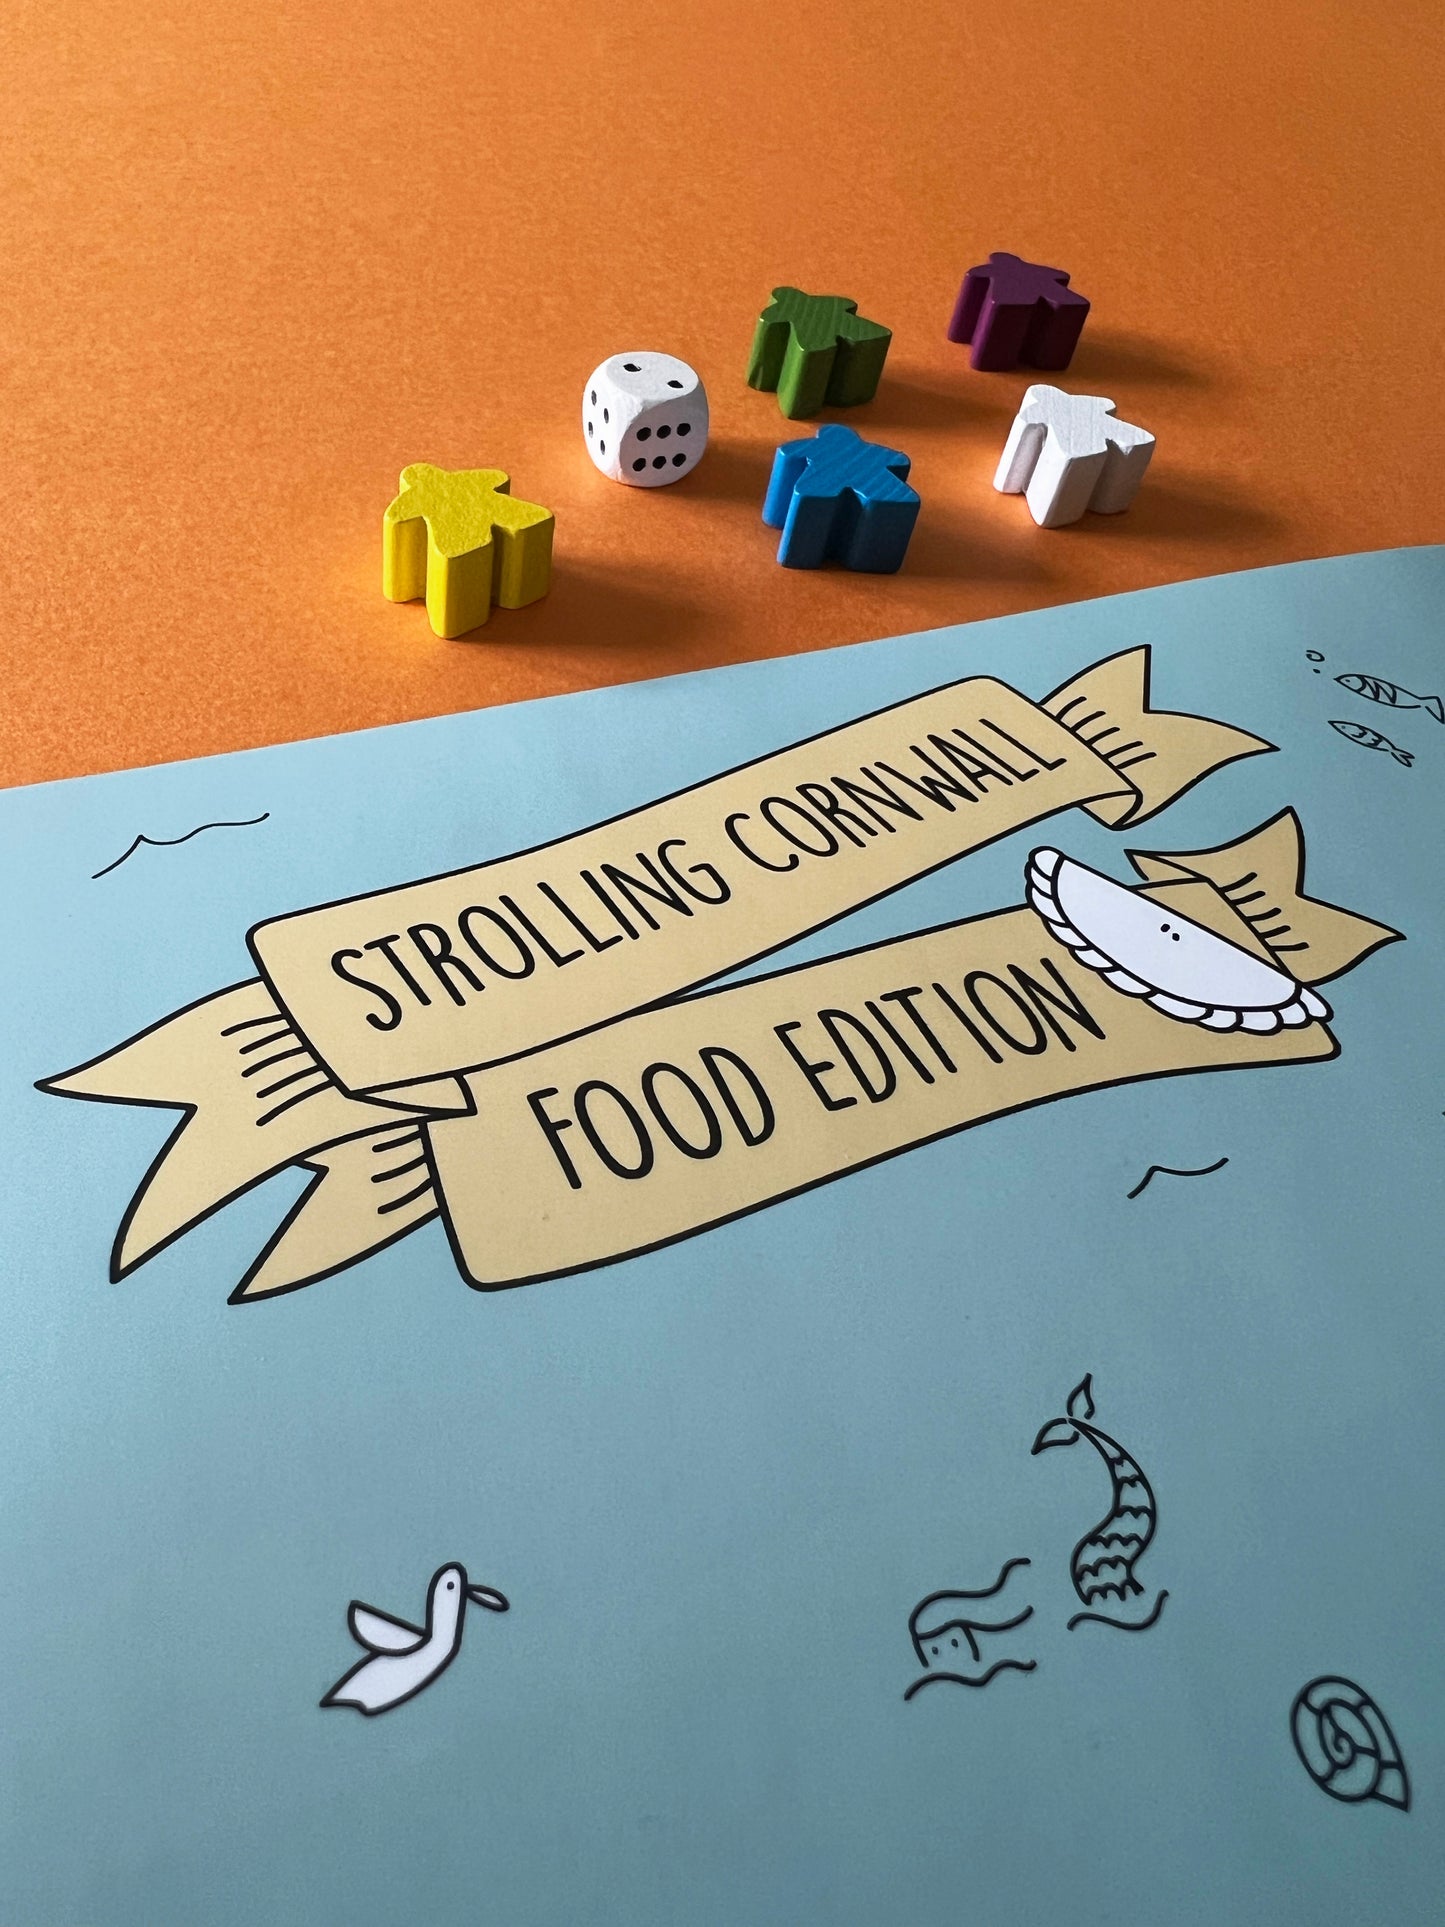 Strolling Cornwall Food Edition with wooden dice and markers. Illustration of a Cornish pasty.